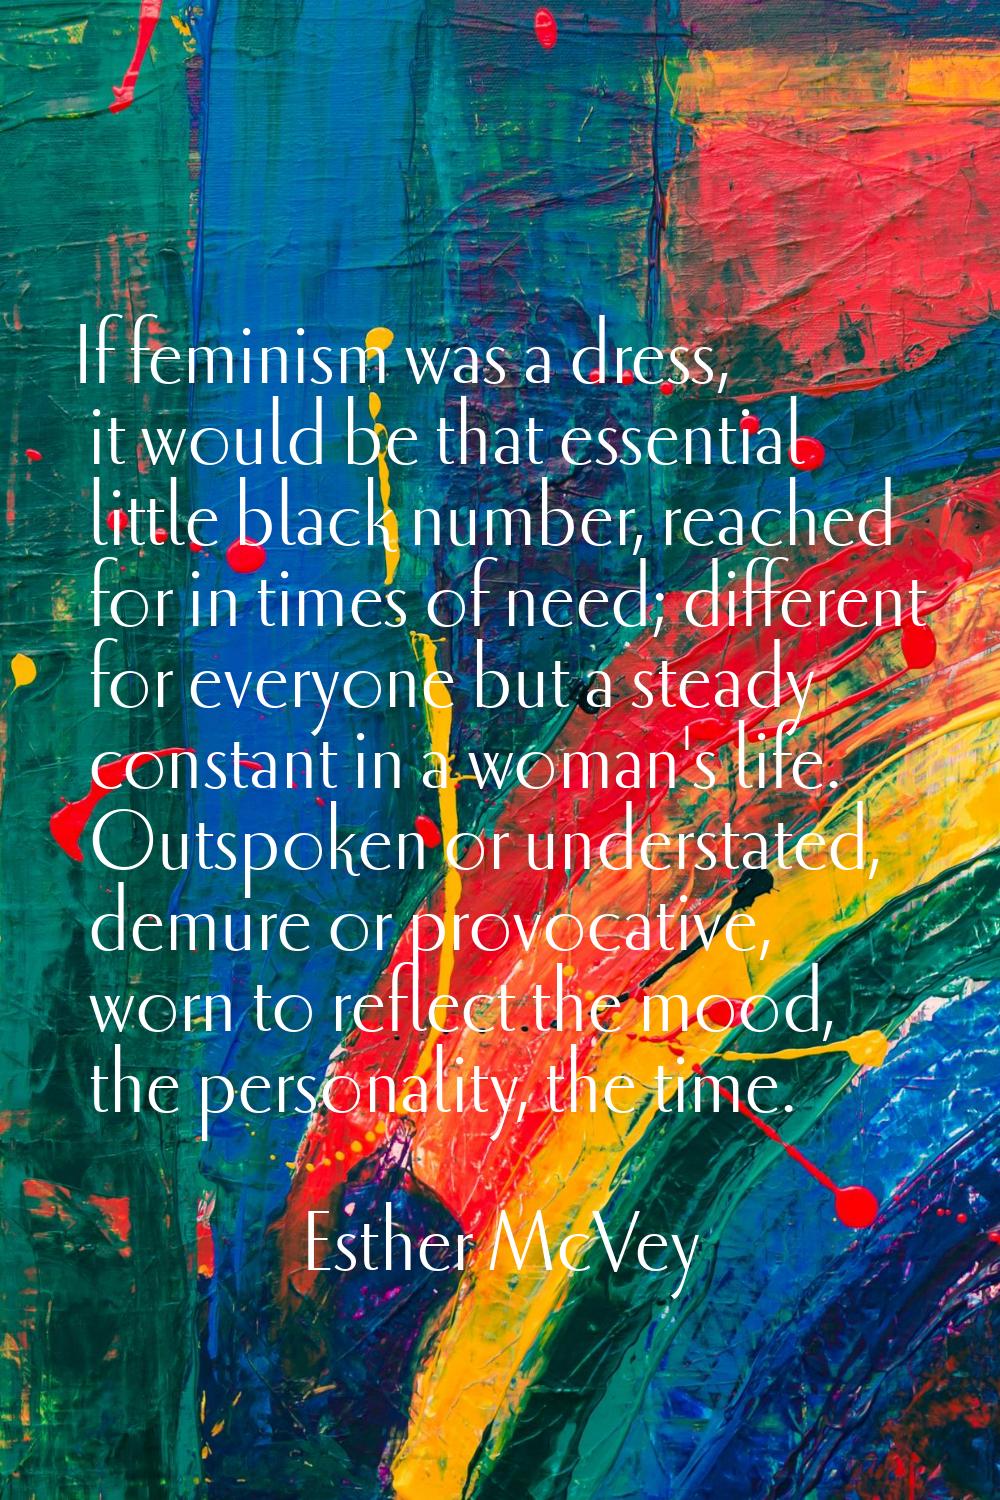 If feminism was a dress, it would be that essential little black number, reached for in times of ne